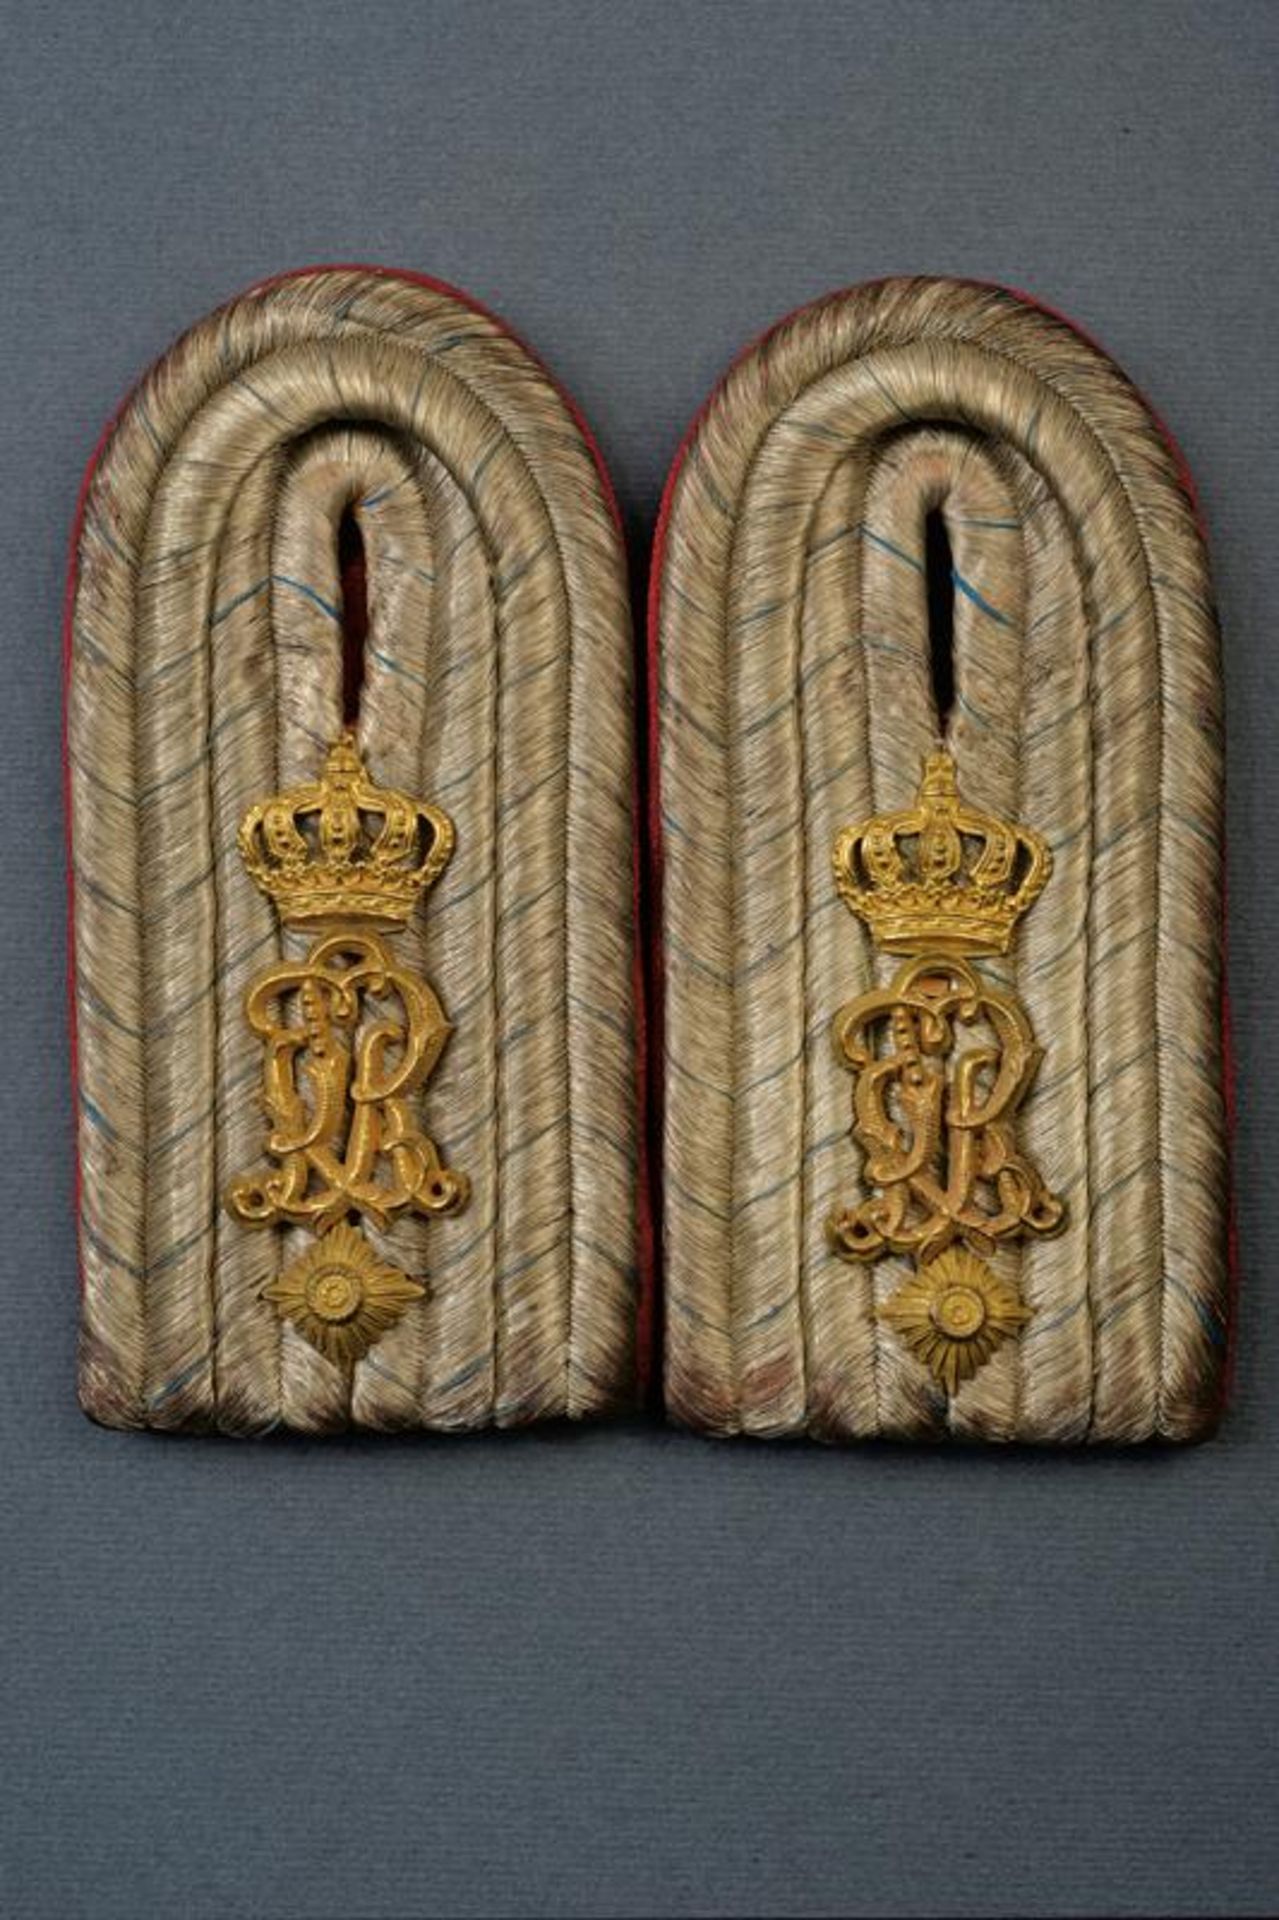 A pair of officer's shoulder boards